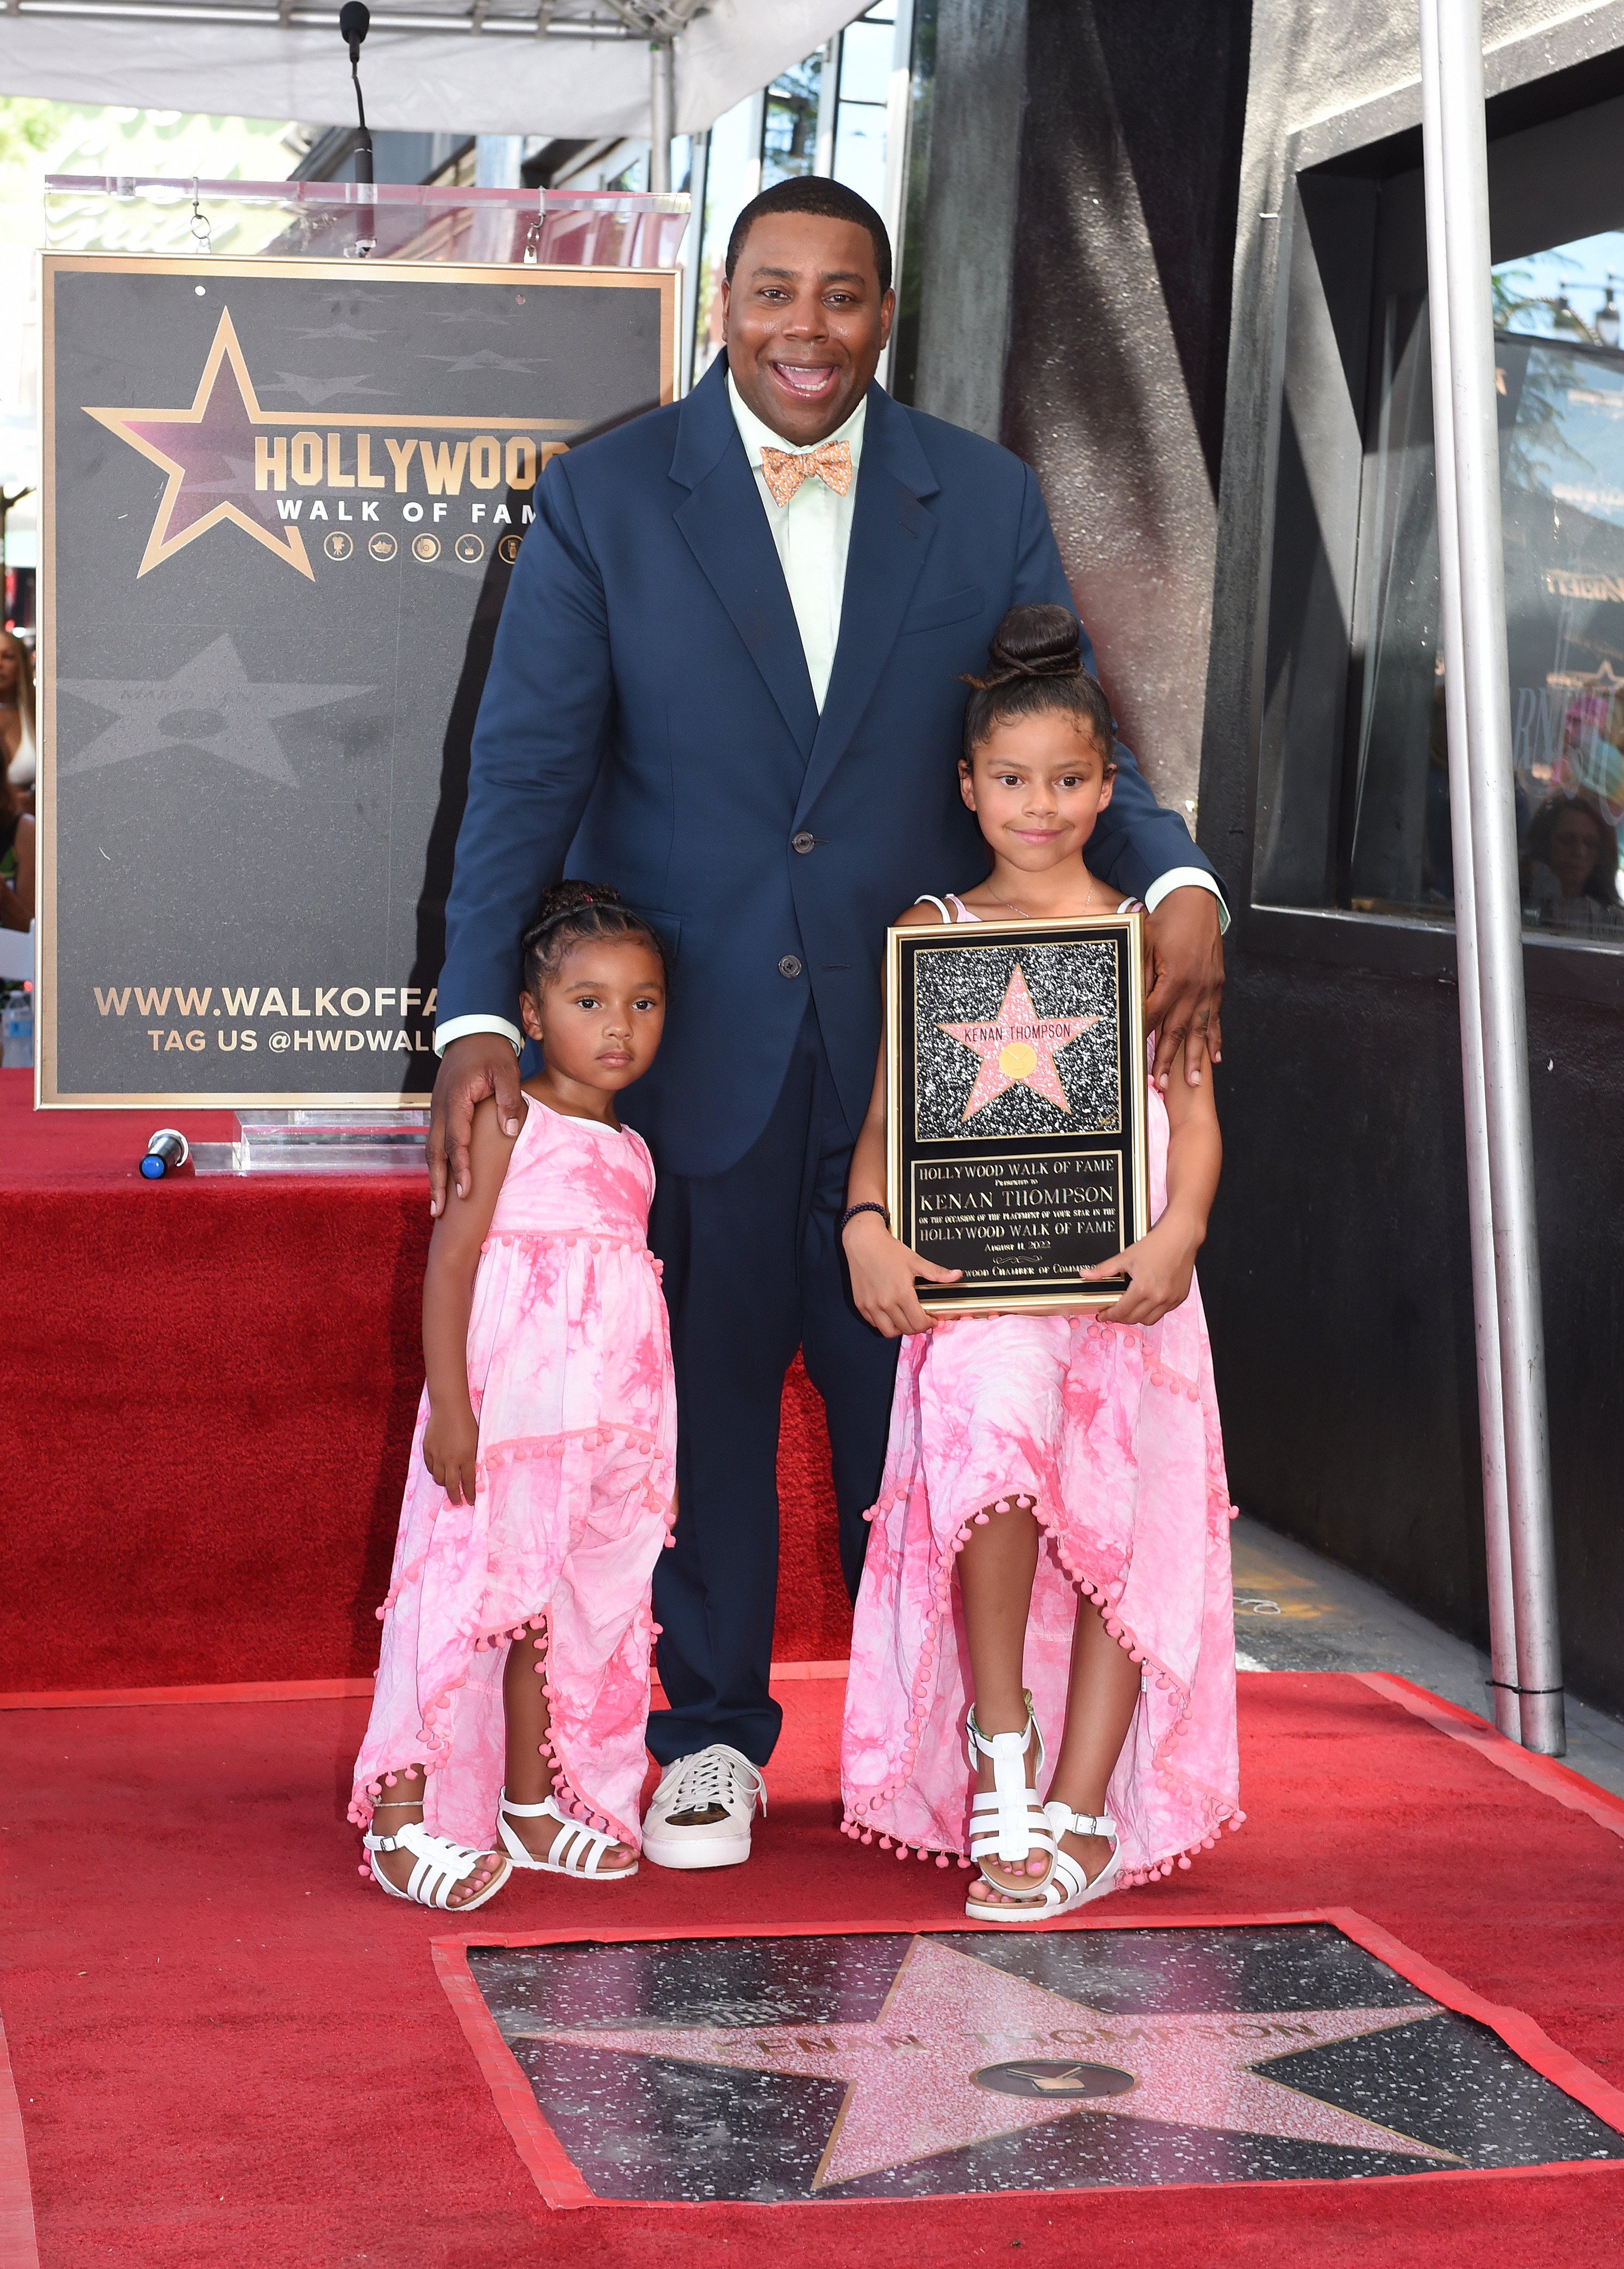 Kenan Thompson smiles with his daughters Gianna Thompson and Georgia Thompson at the Hollywood Walk of Fame Star Ceremony on August 11, 2022, in Los Angeles, California. | Source: Getty Images